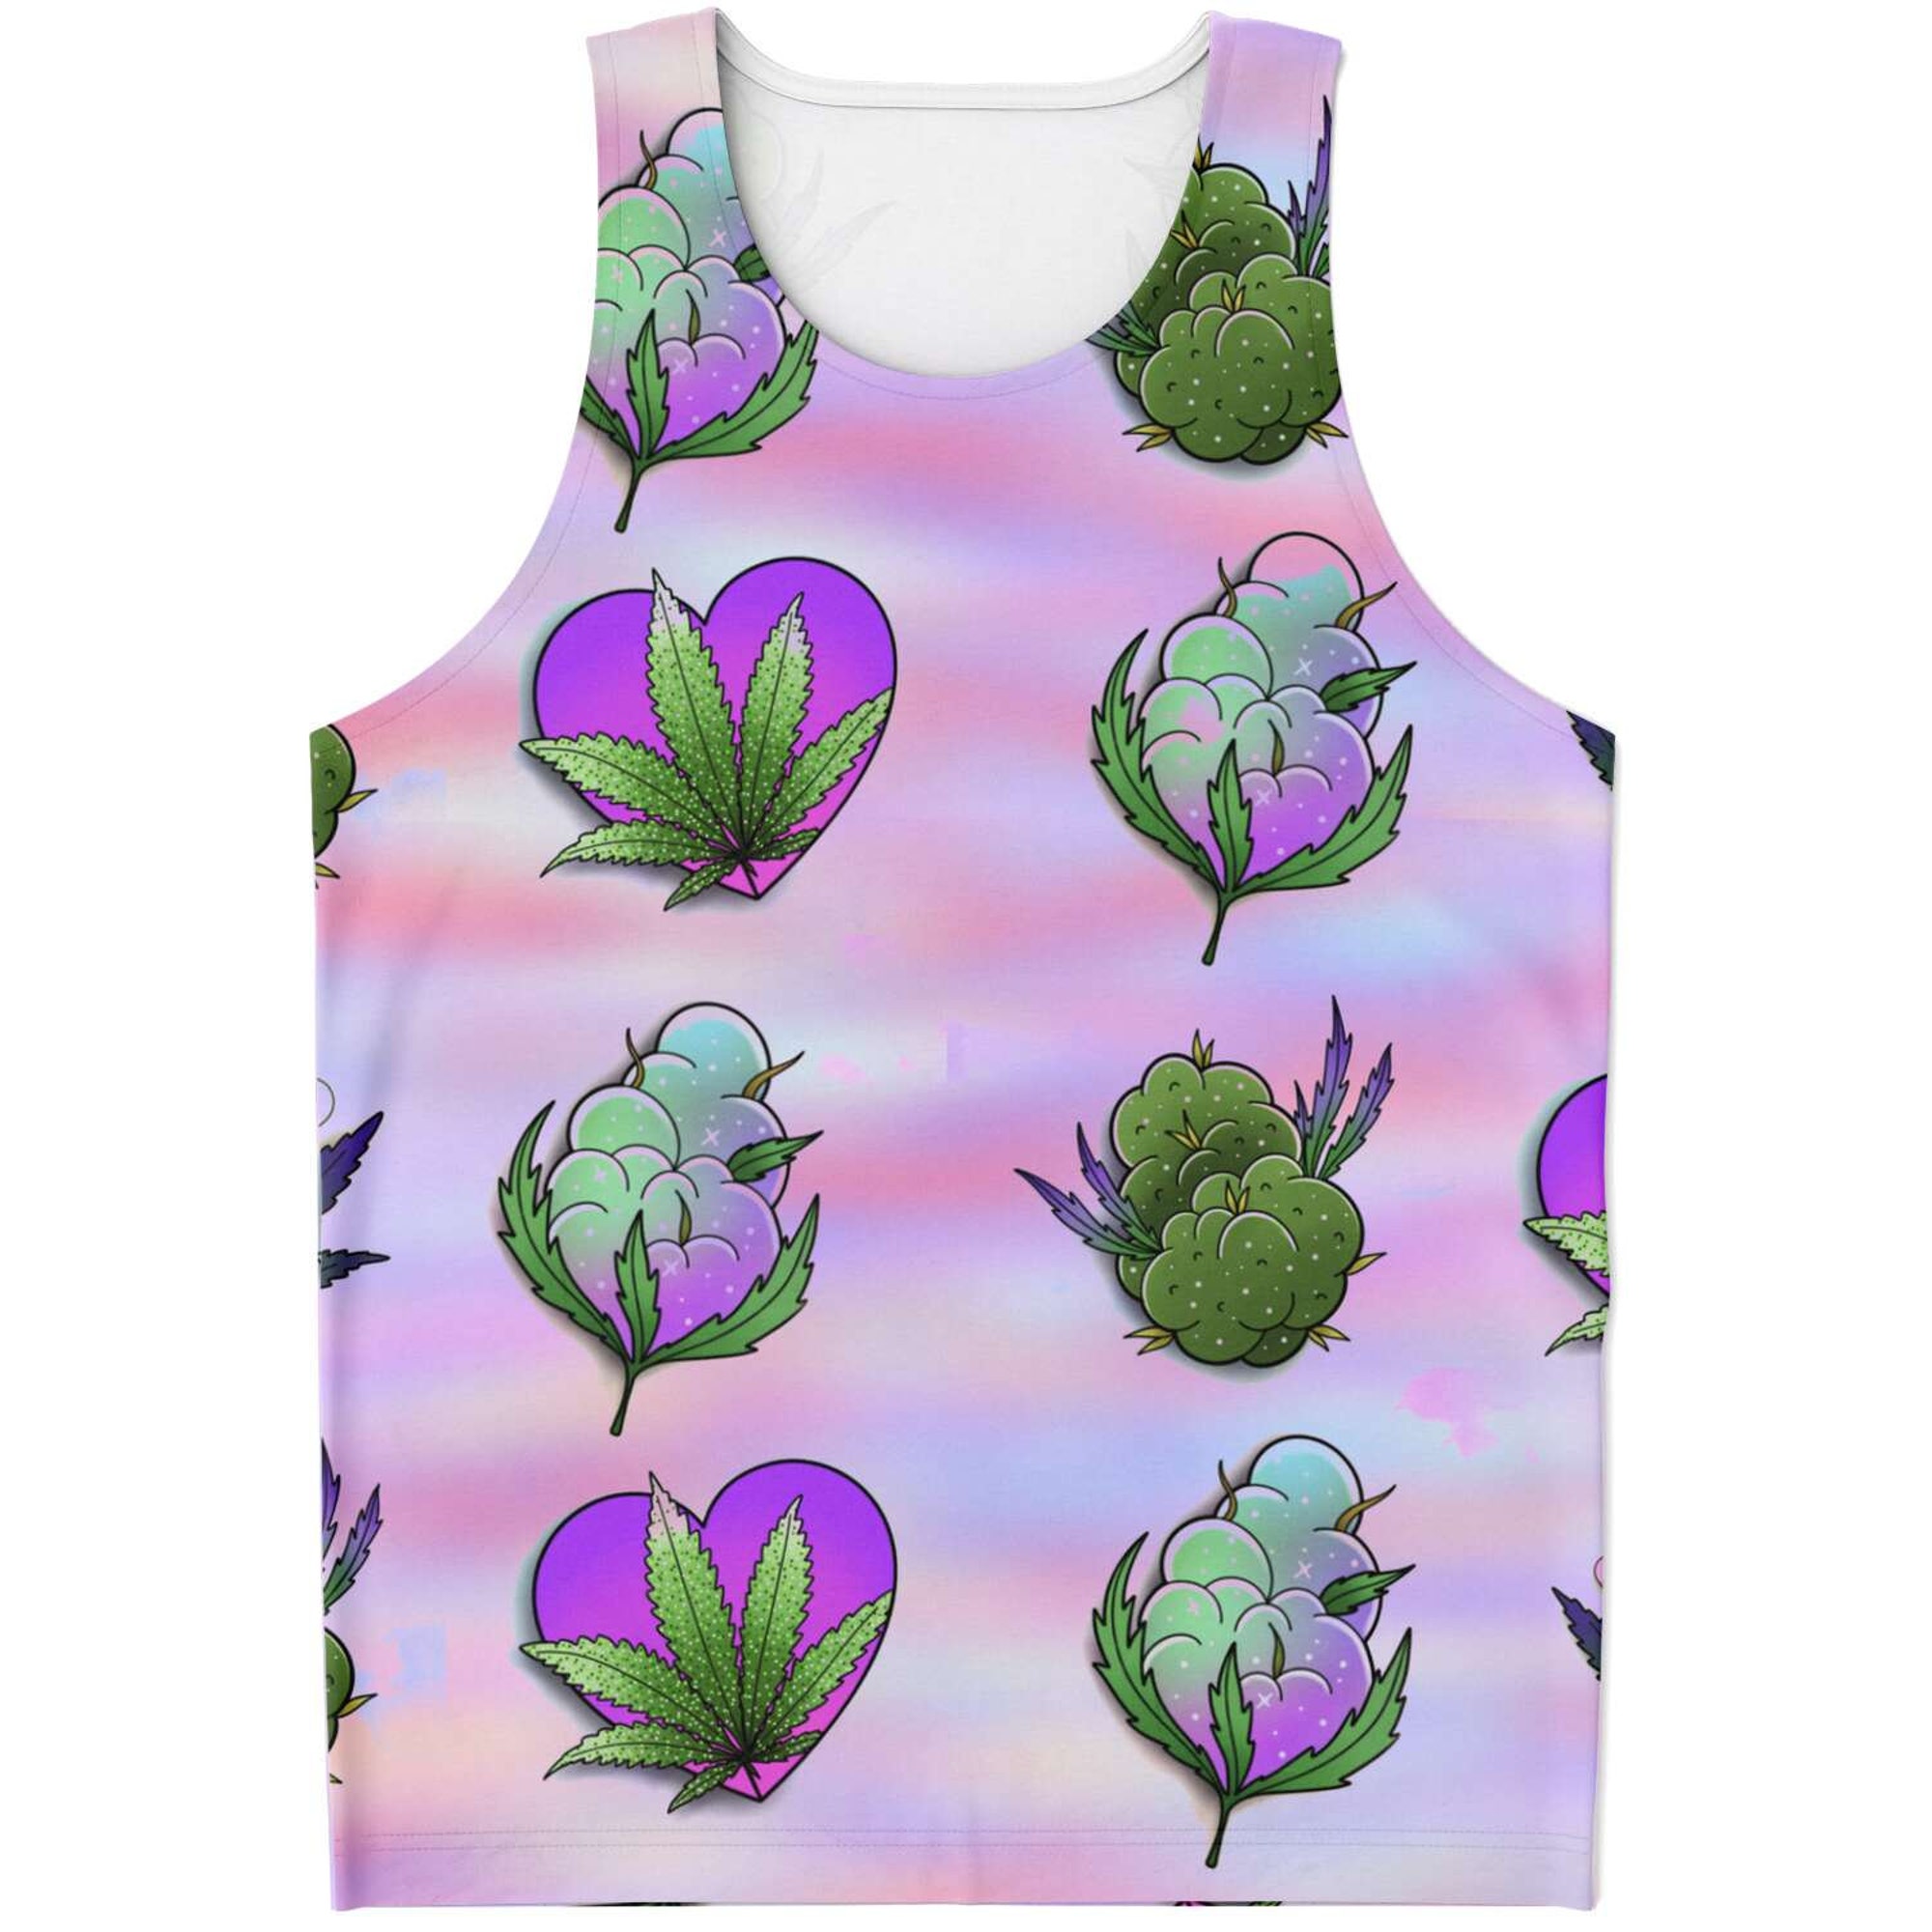 Discover Music Festival Gear Psychedelic Rave 3D Tank Top